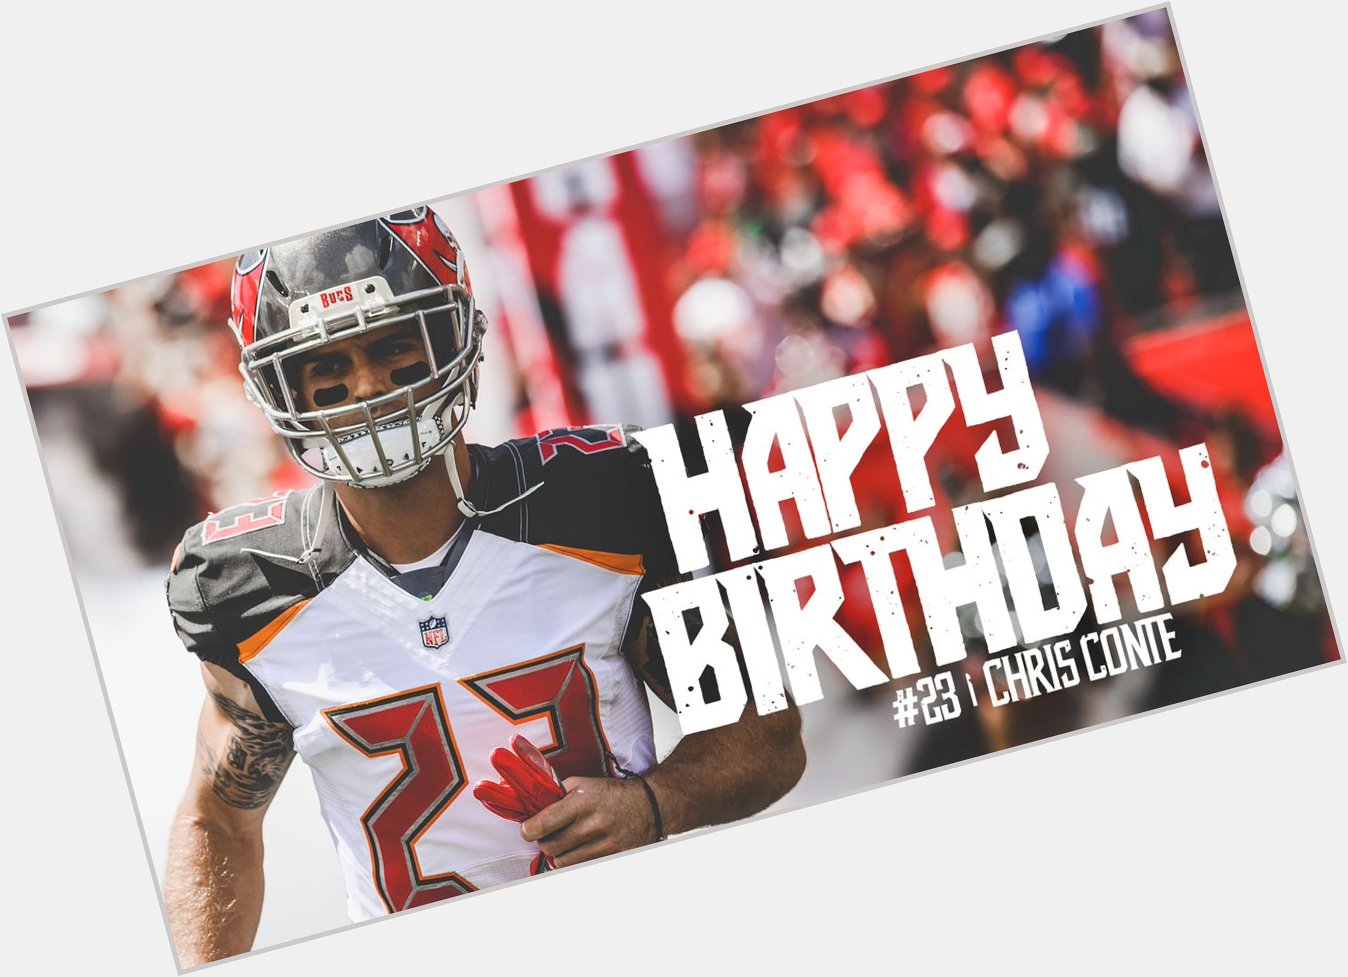 Happy birthday, Chris Conte! We hope you have a special day! 